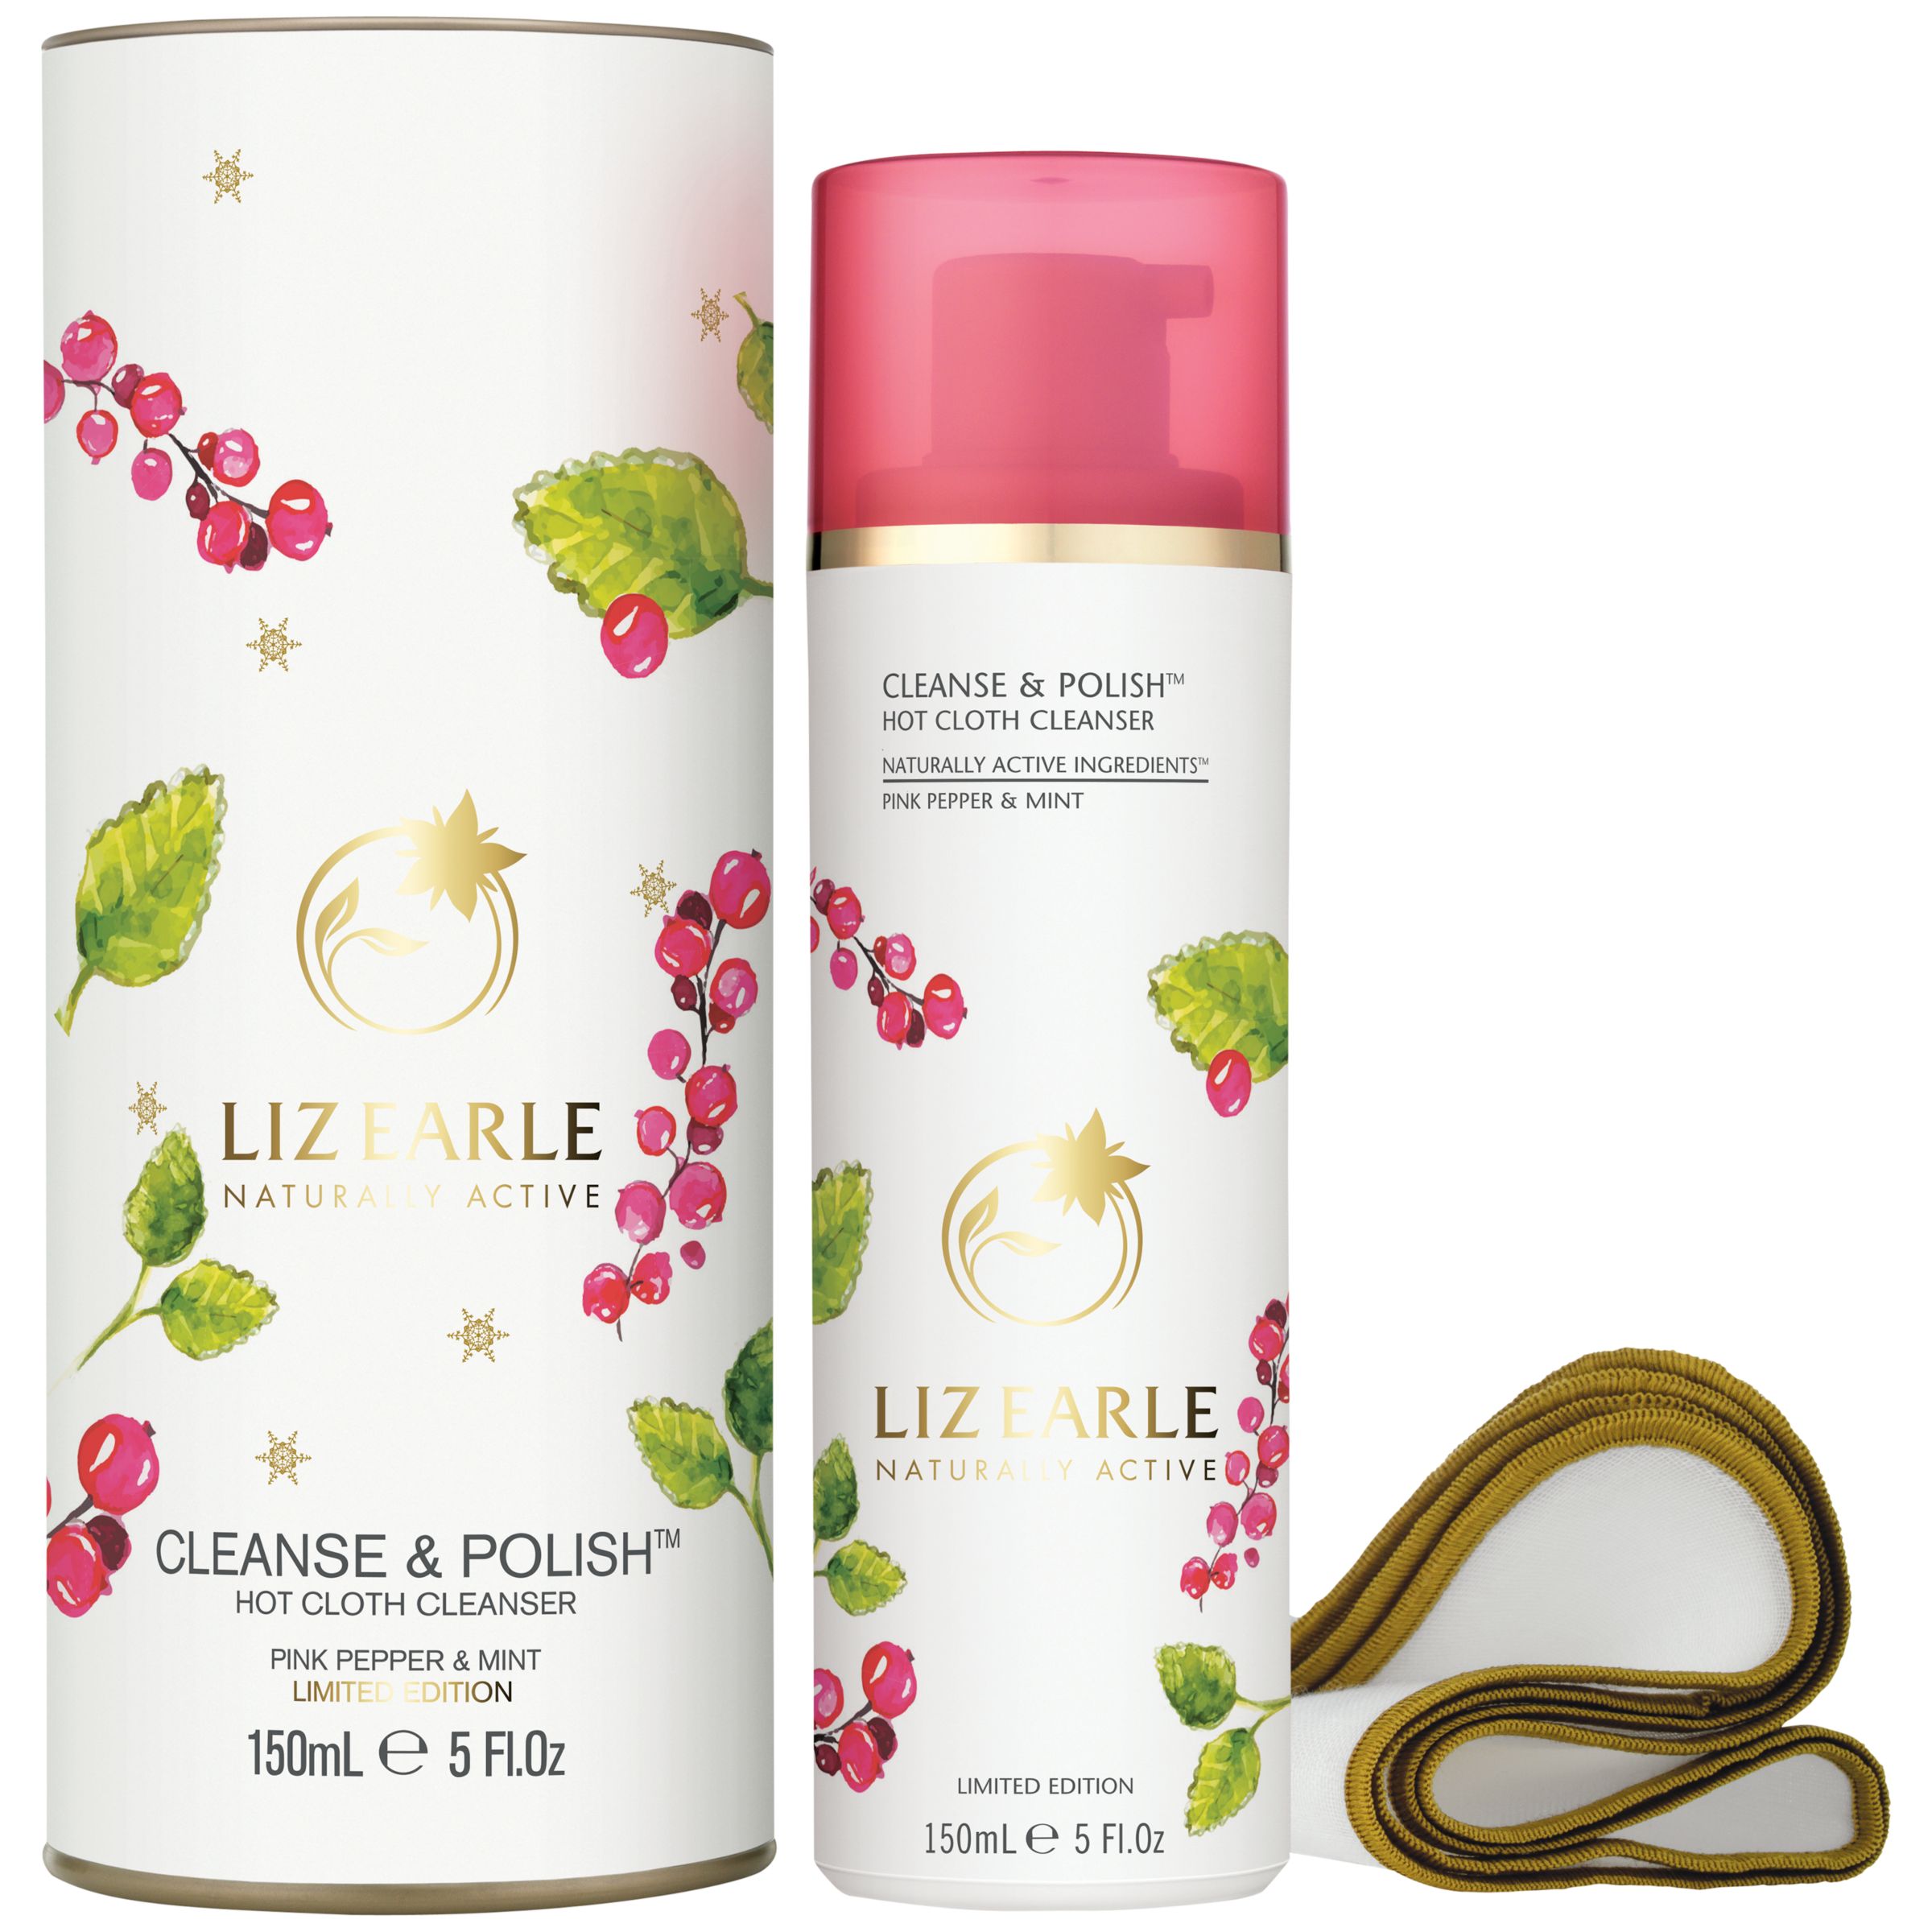 Liz Earle Cleanse And Polish Hot Cloth Cleanser Pink Pepper And Mint Limited Edition 150ml At John